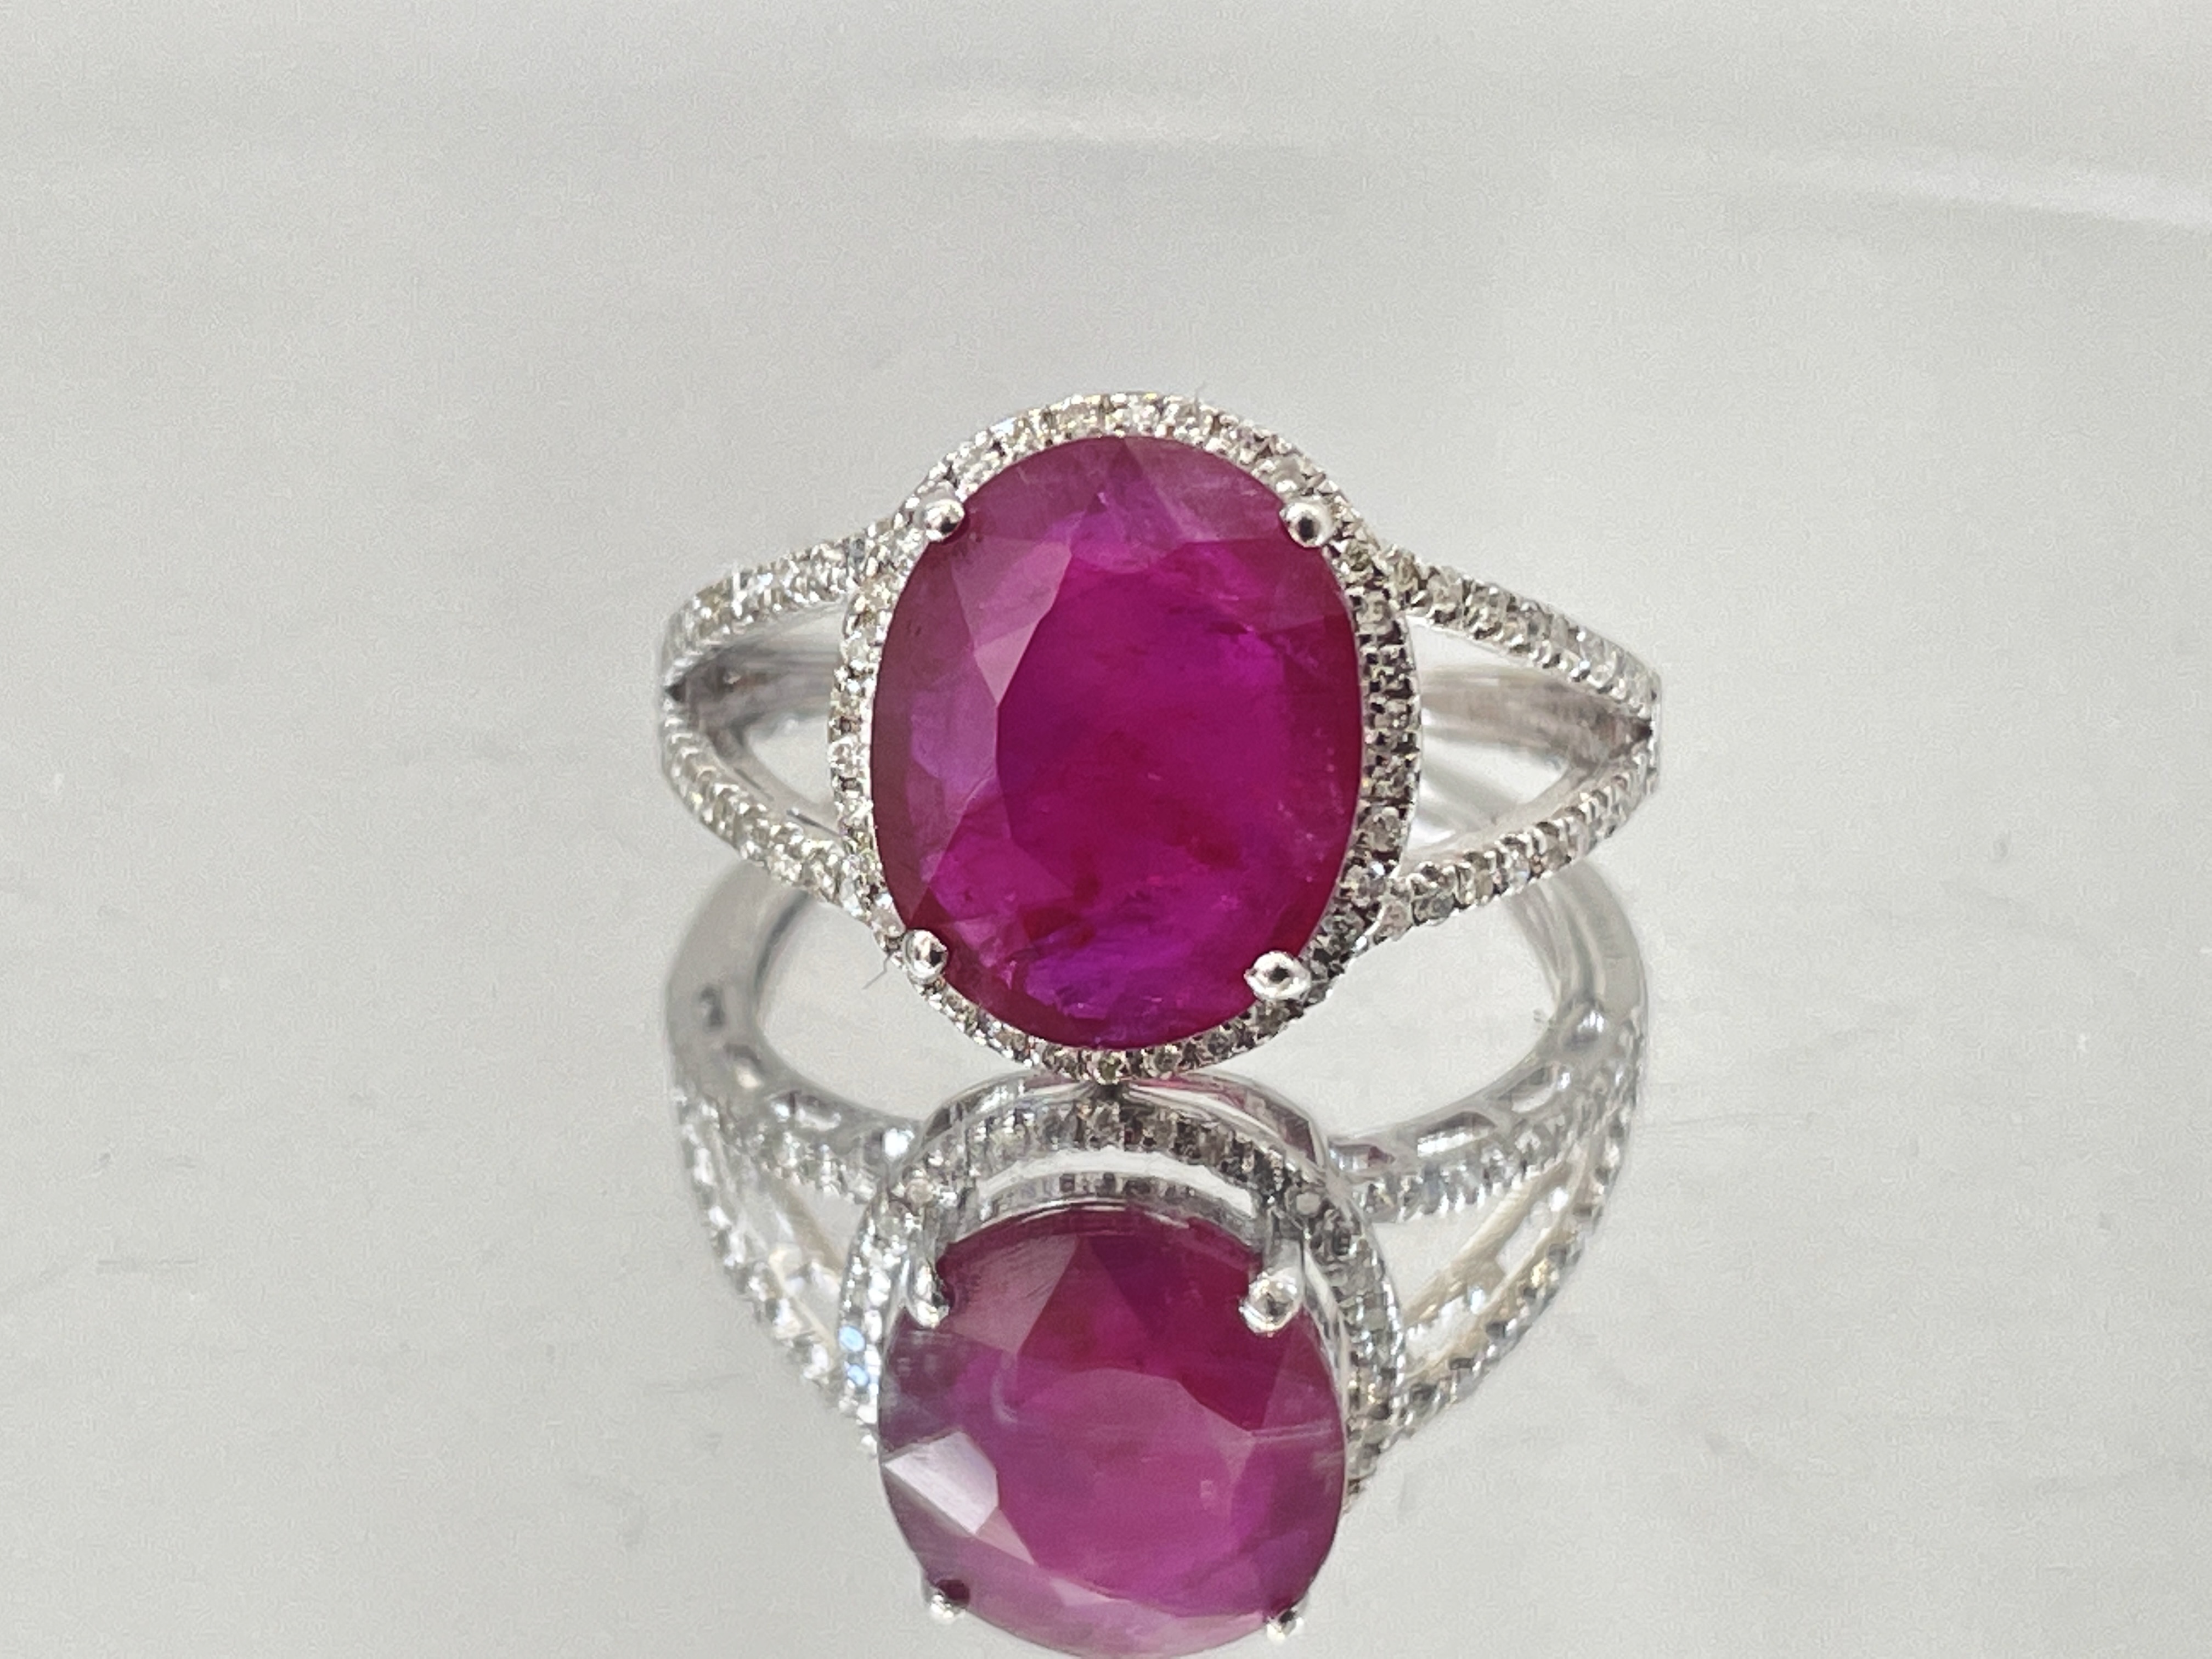 Natural Burma Ruby 3.77Ct With Natural Diamonds & 18kGold - Image 2 of 6